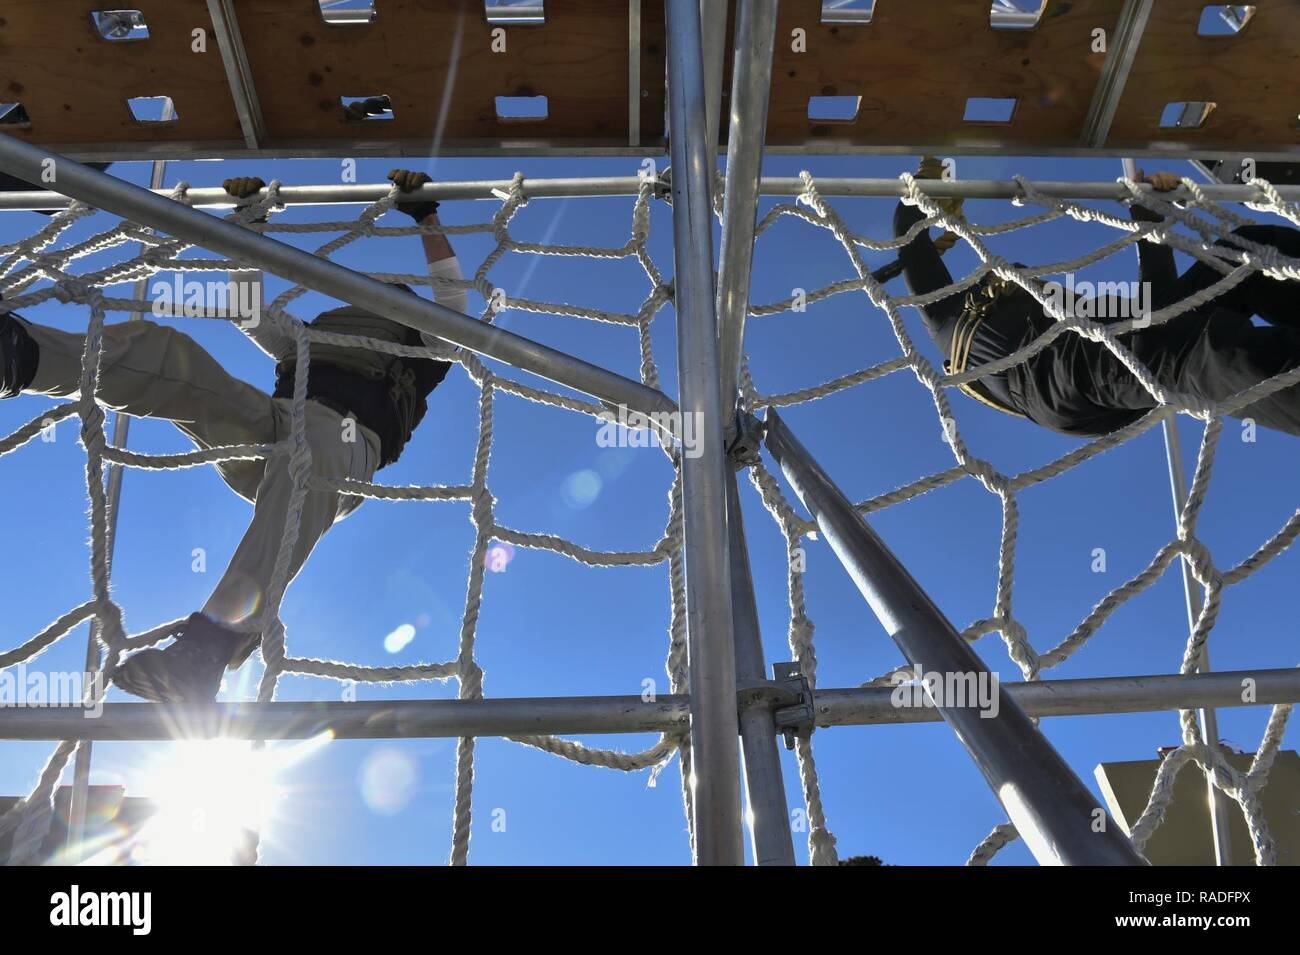 Members of the Richland County Sheriff's Department participate in the first “Battle Challenge” at McCrady Training Center in Eastover, S.C., Jan. 28, 2017. The Battle Challenge is a mobile obstacle course requiring participants to perform nine tasks under pressure of time, including a cargo net climb, a knotted rope descent, wall surmount, ammunition resupply, low crawl, gas can carry, marksmanship tasks, and a service member-down rescue. The event was open to all military service members, law enforcement, first responders, firefighters, protective services and their 18 and older family membe Stock Photo